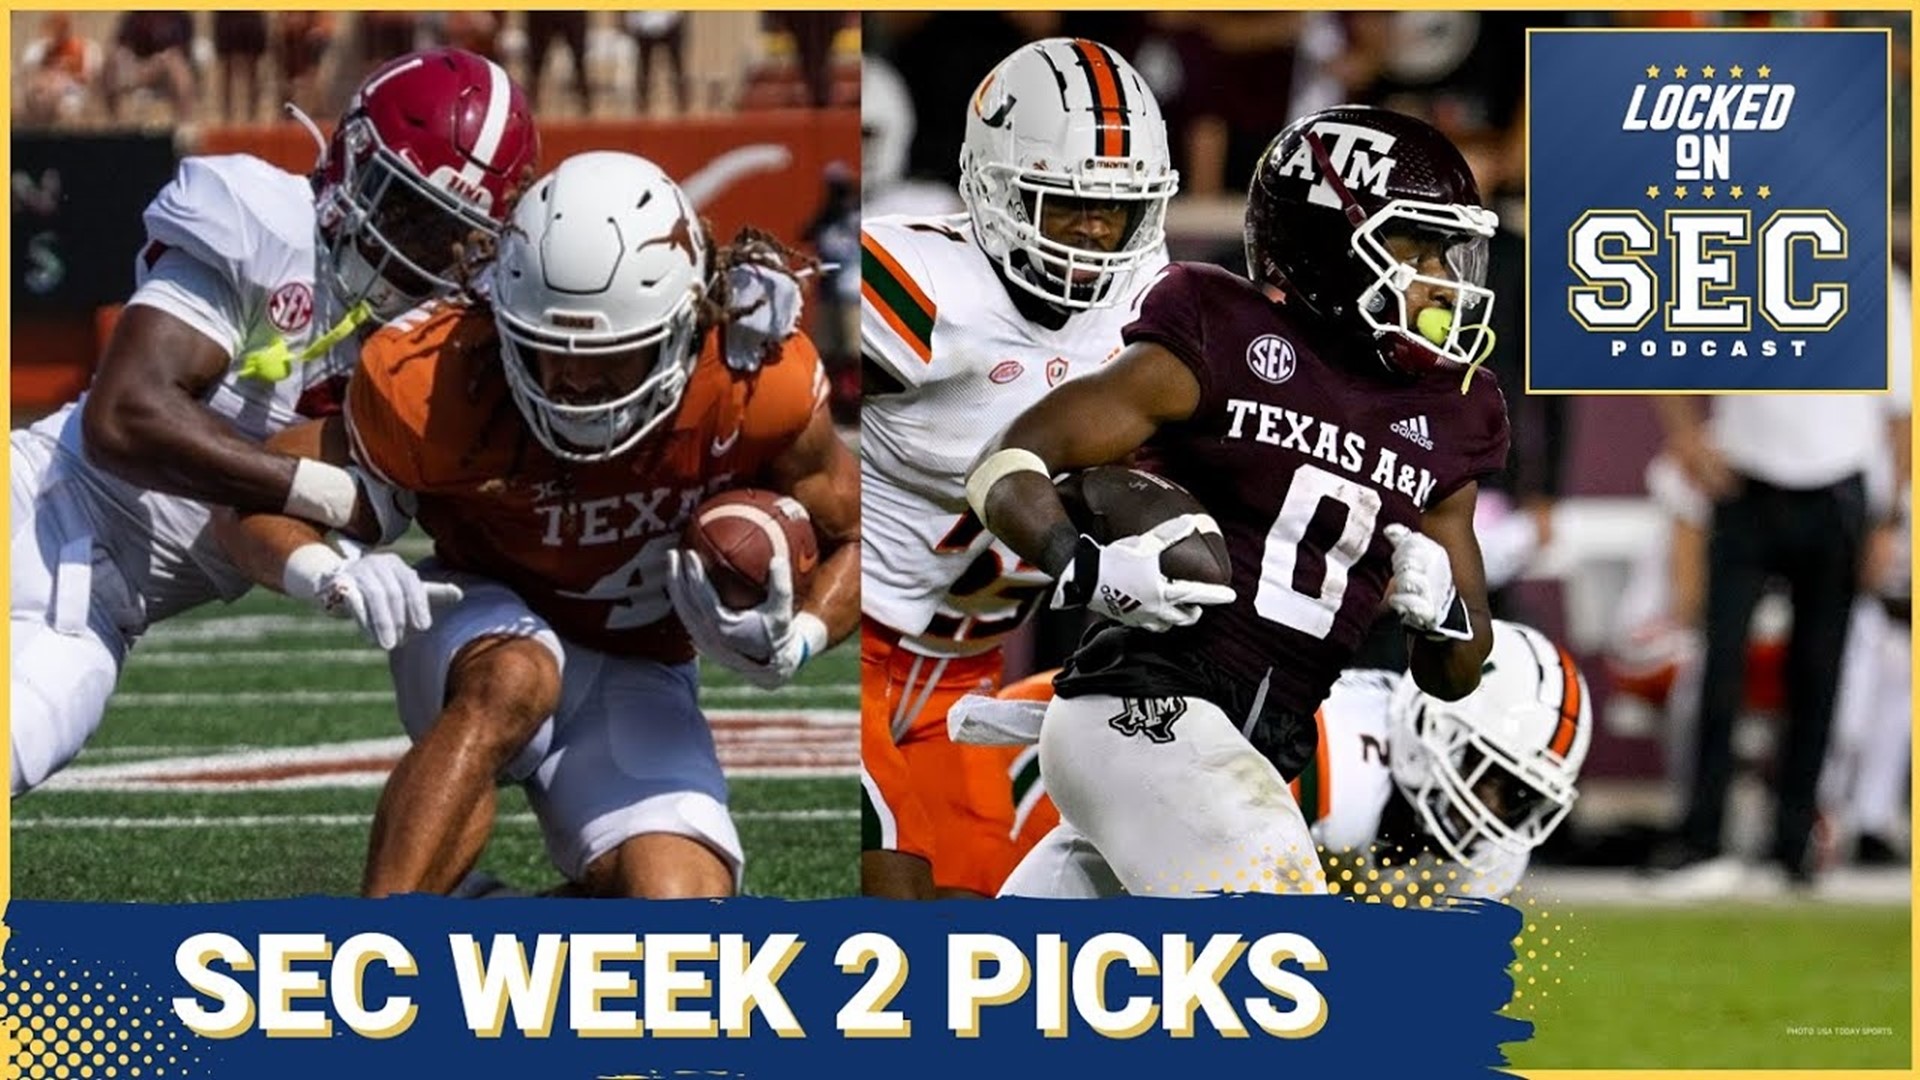 On today's show, we get you ready for SEC Week 2 as we get you caught up on some news Around The Conference